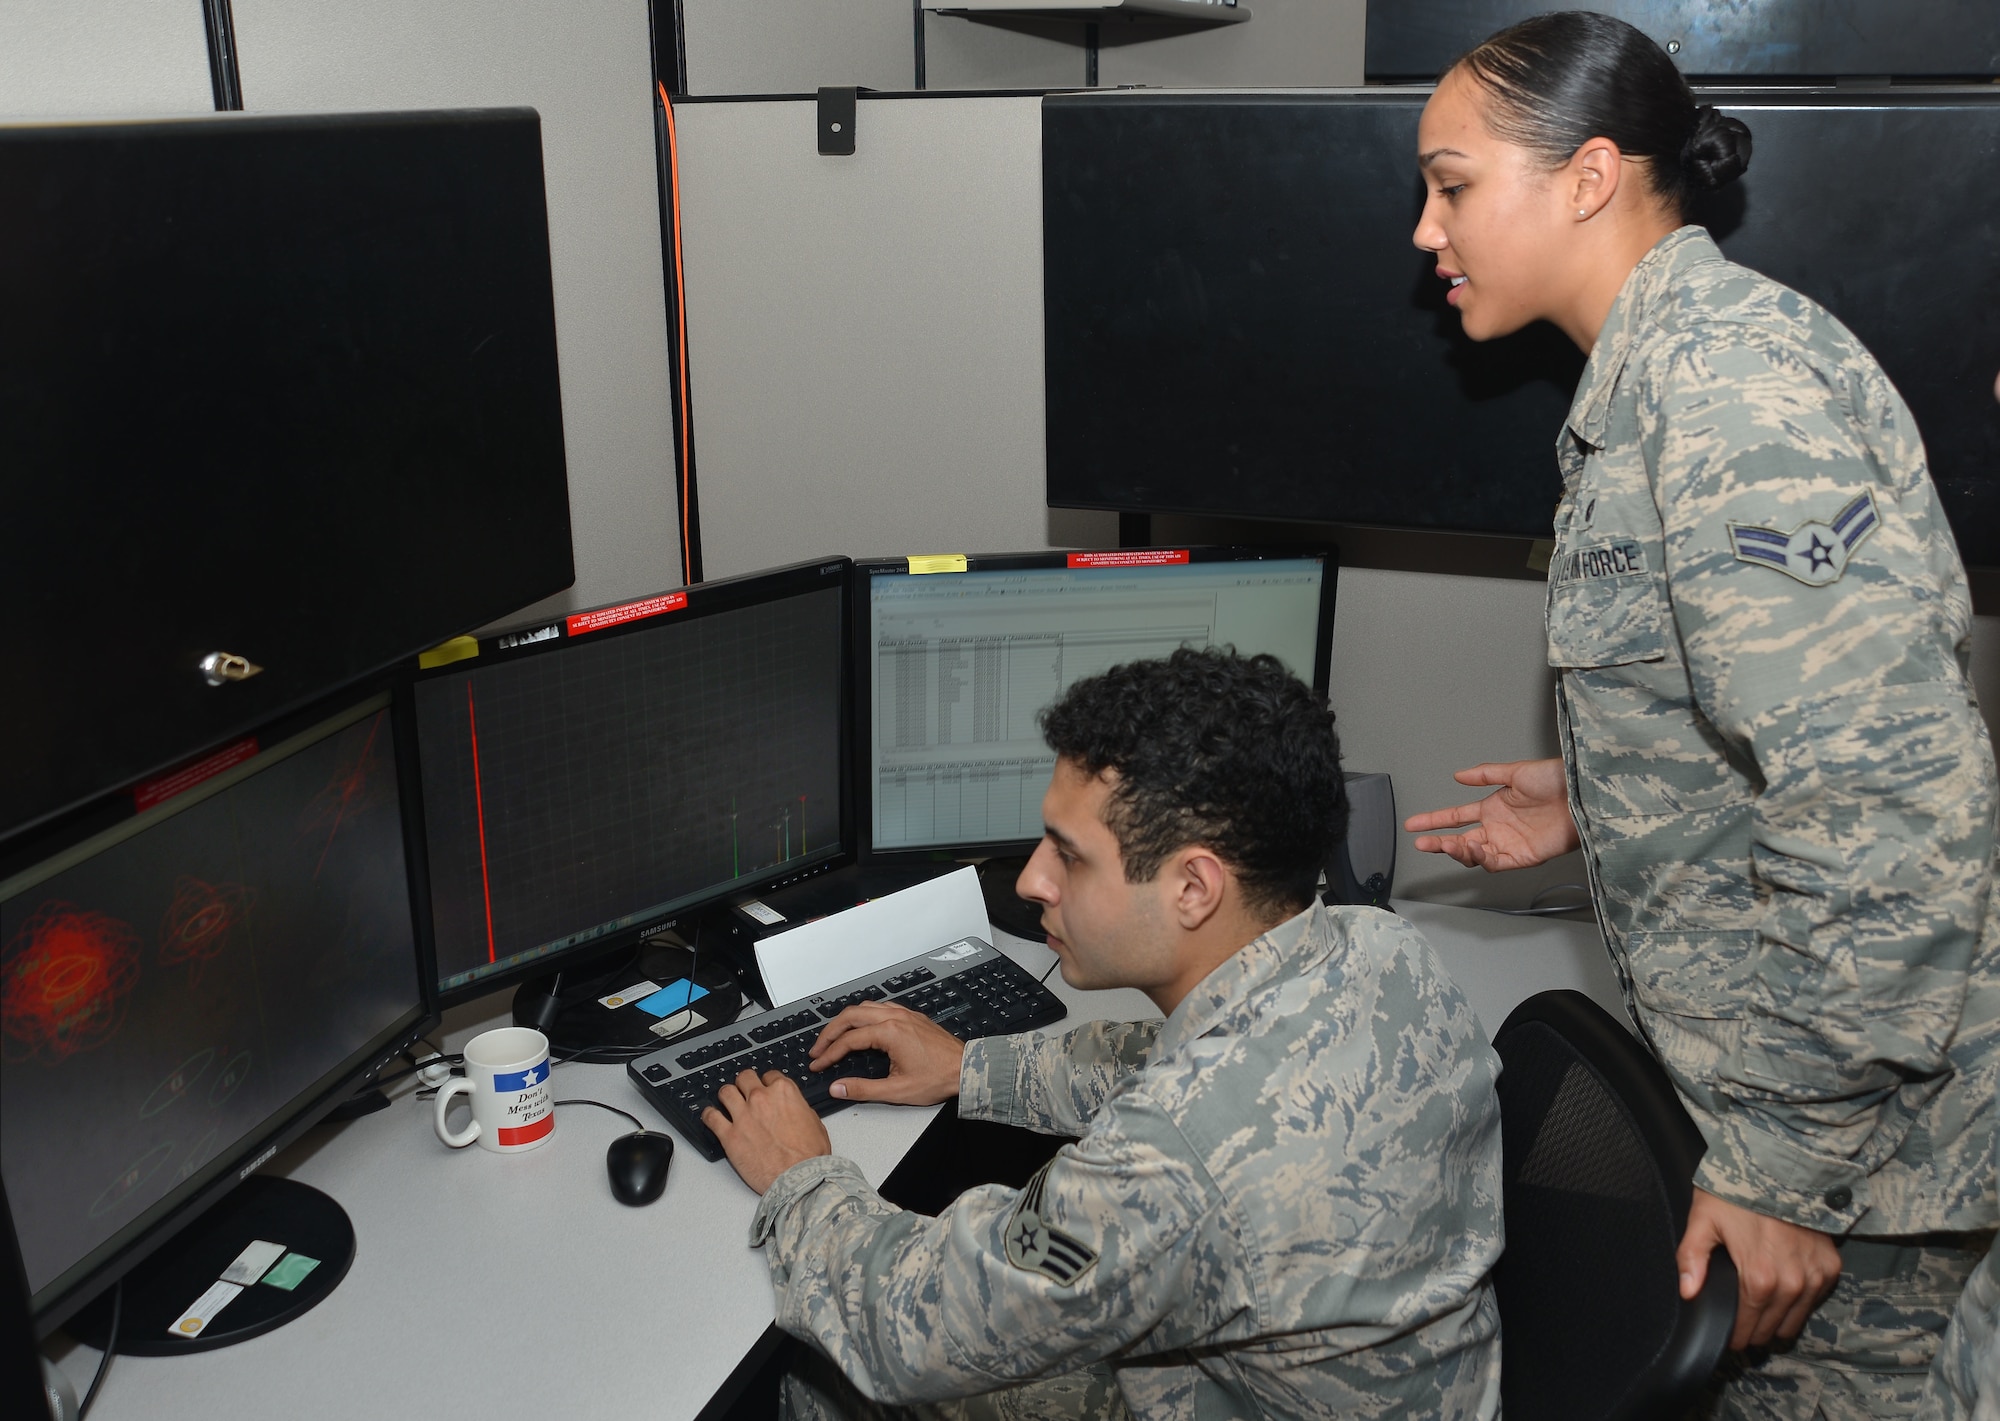 Analysts from the 453rd Electronic Warfare Squadron validate results from an automated flagging process called data-mining March 31, 2017, at Joint Base San Antonio-Lackland, Texas. Data-mining allows analysts to validate automated results rather than manually sifting through all the data.  (U.S. Air Force Photo by Lori Bultman/released)